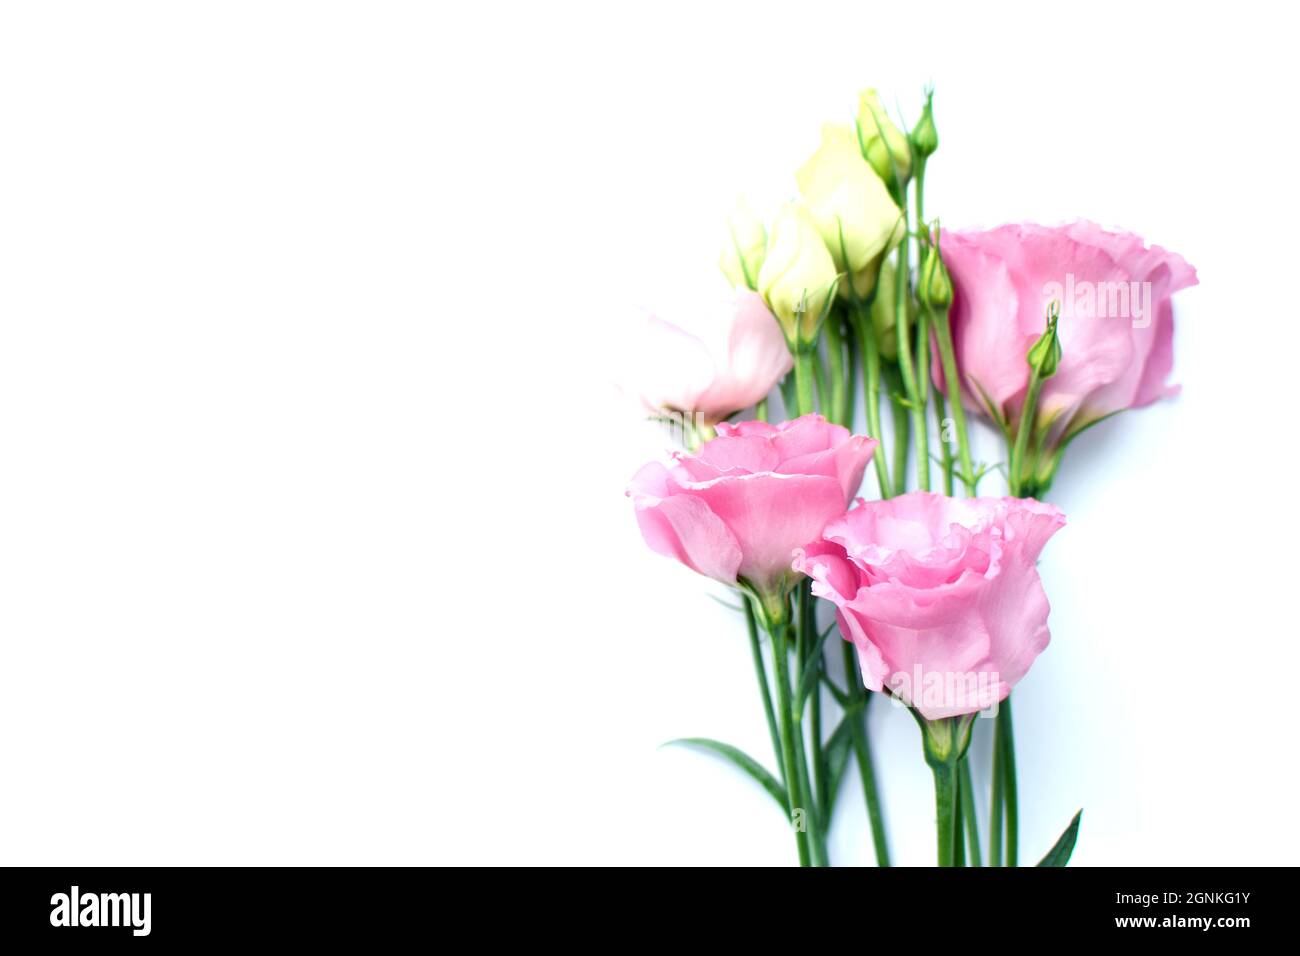 Beautiful pink eustoma flowers (lisianthus) in full bloom with buds leaves. Bouquet of flowers on white background. Copy space Stock Photo